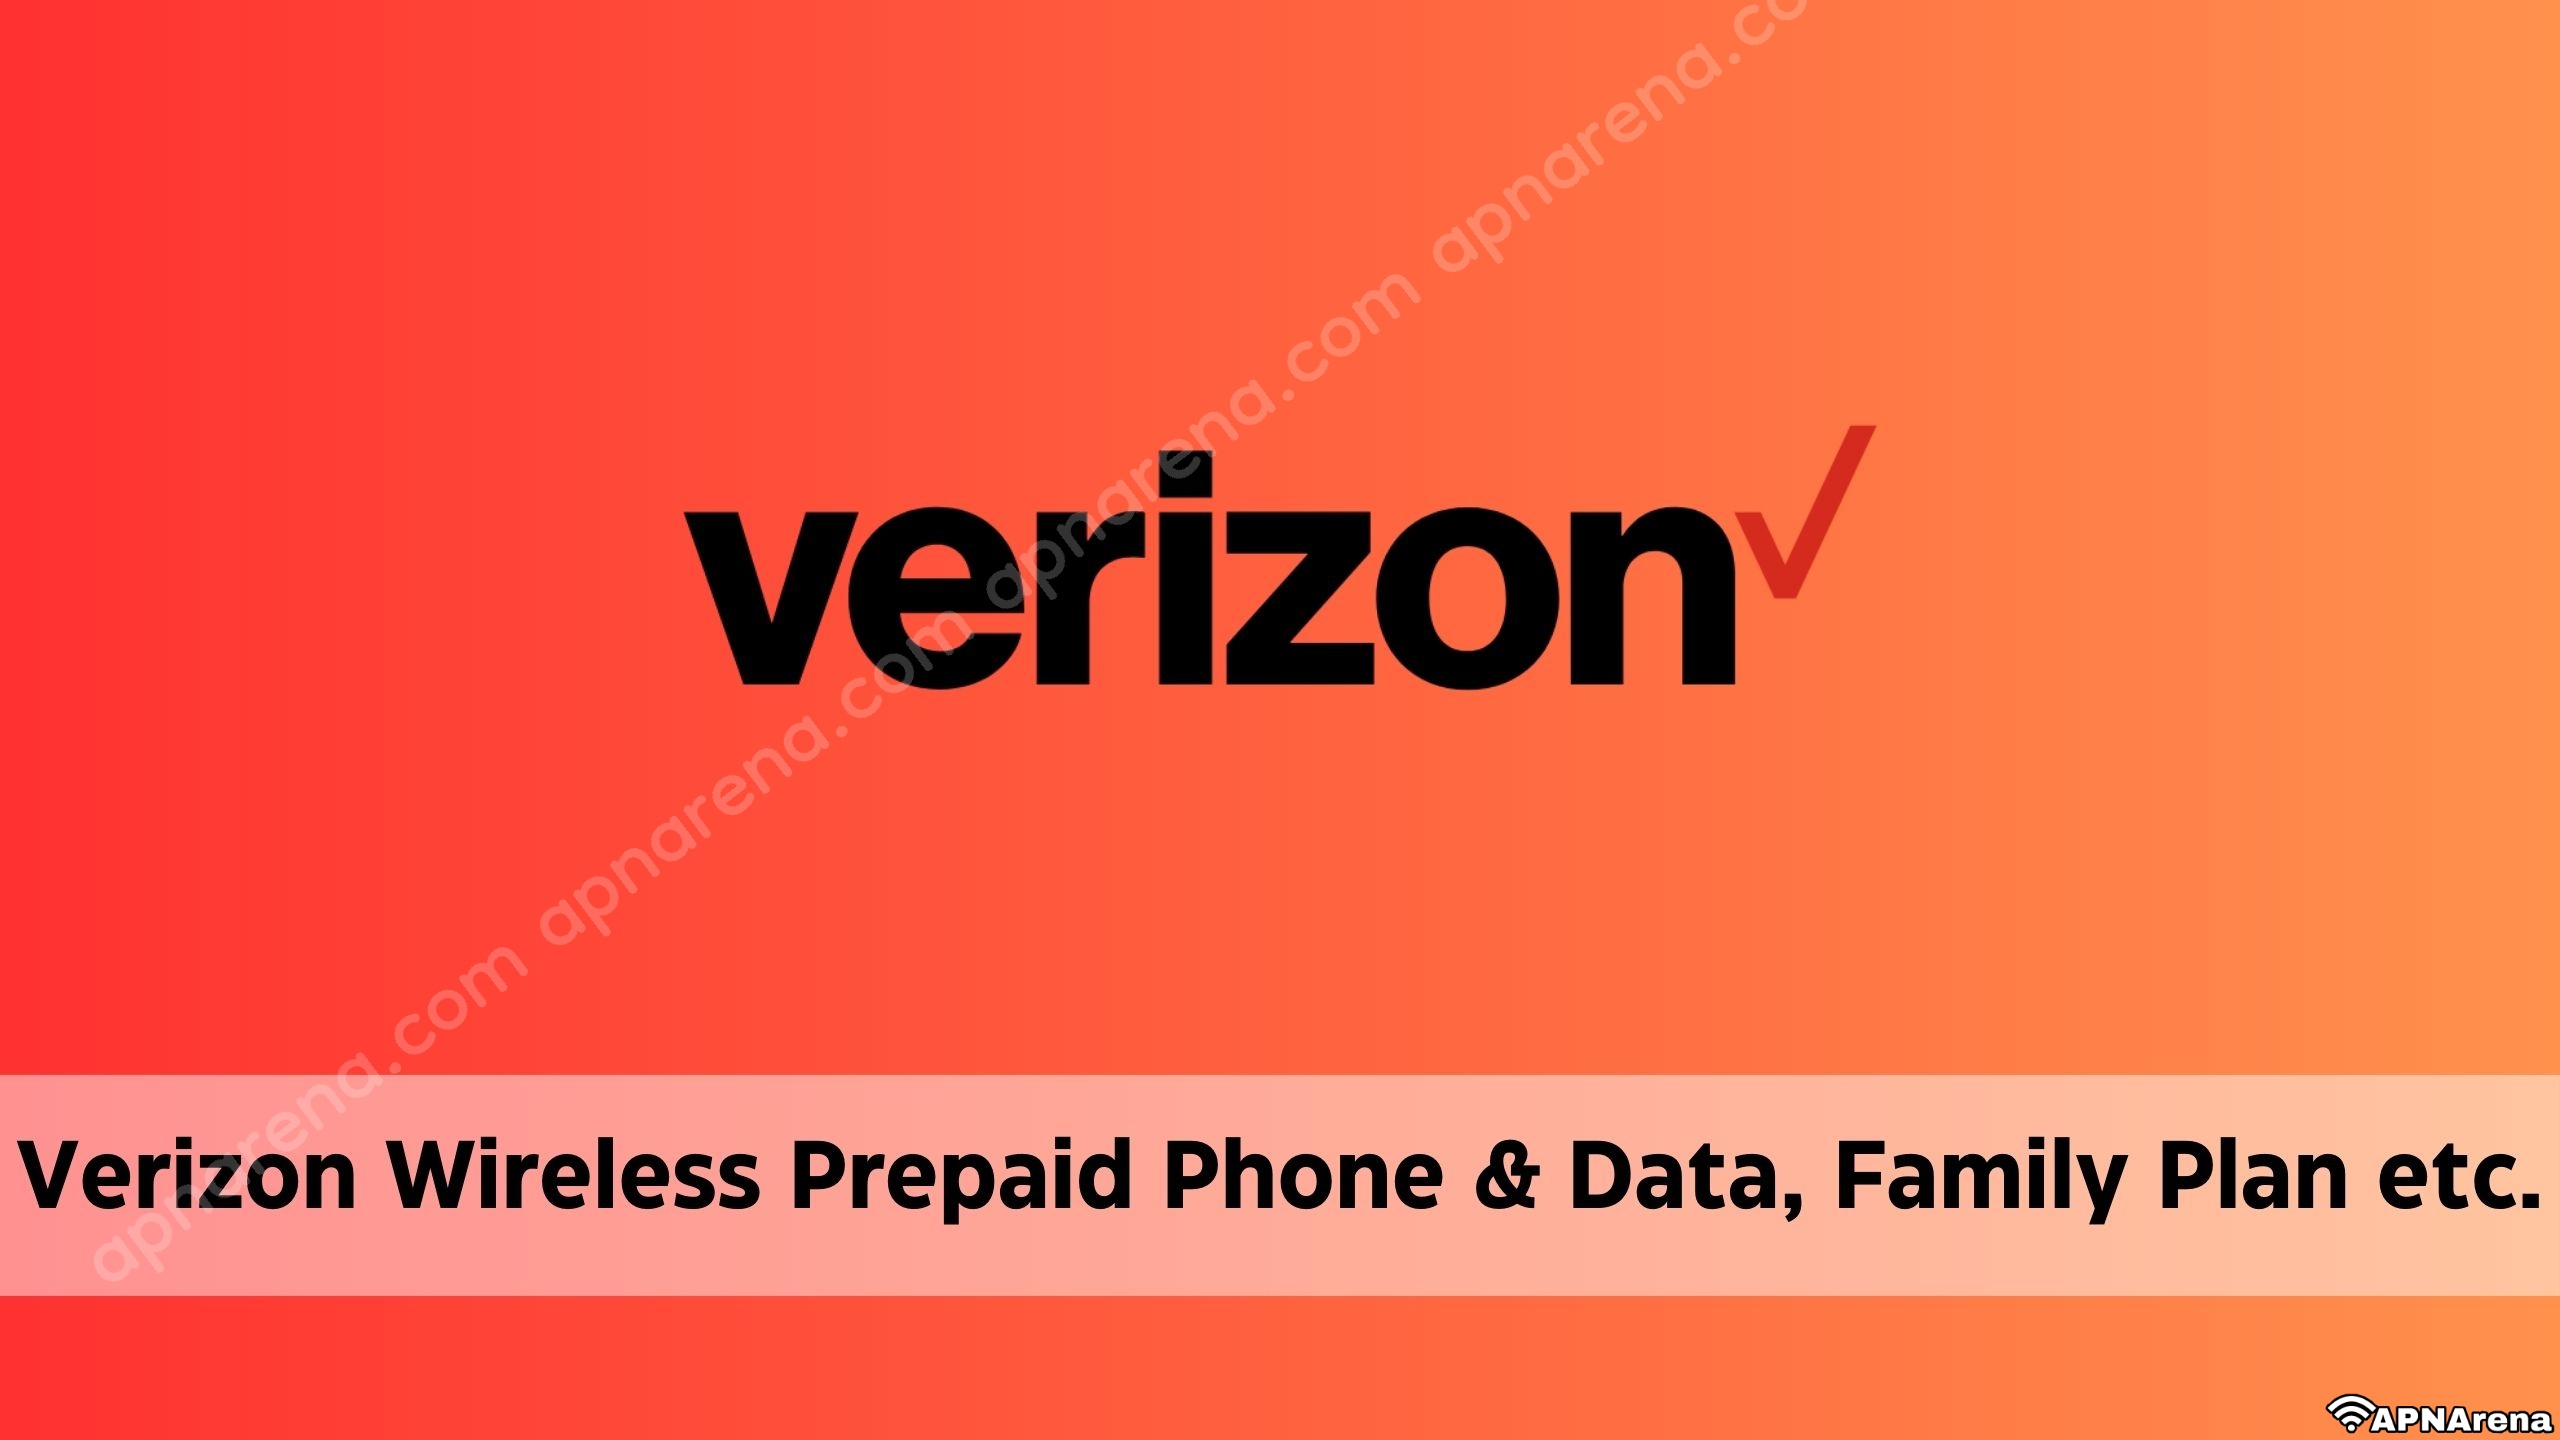 Verizon Wireless Prepaid Phone and Data Plan including Family Plan, Hotspost, 5G Unlimited Internet, Call & Text